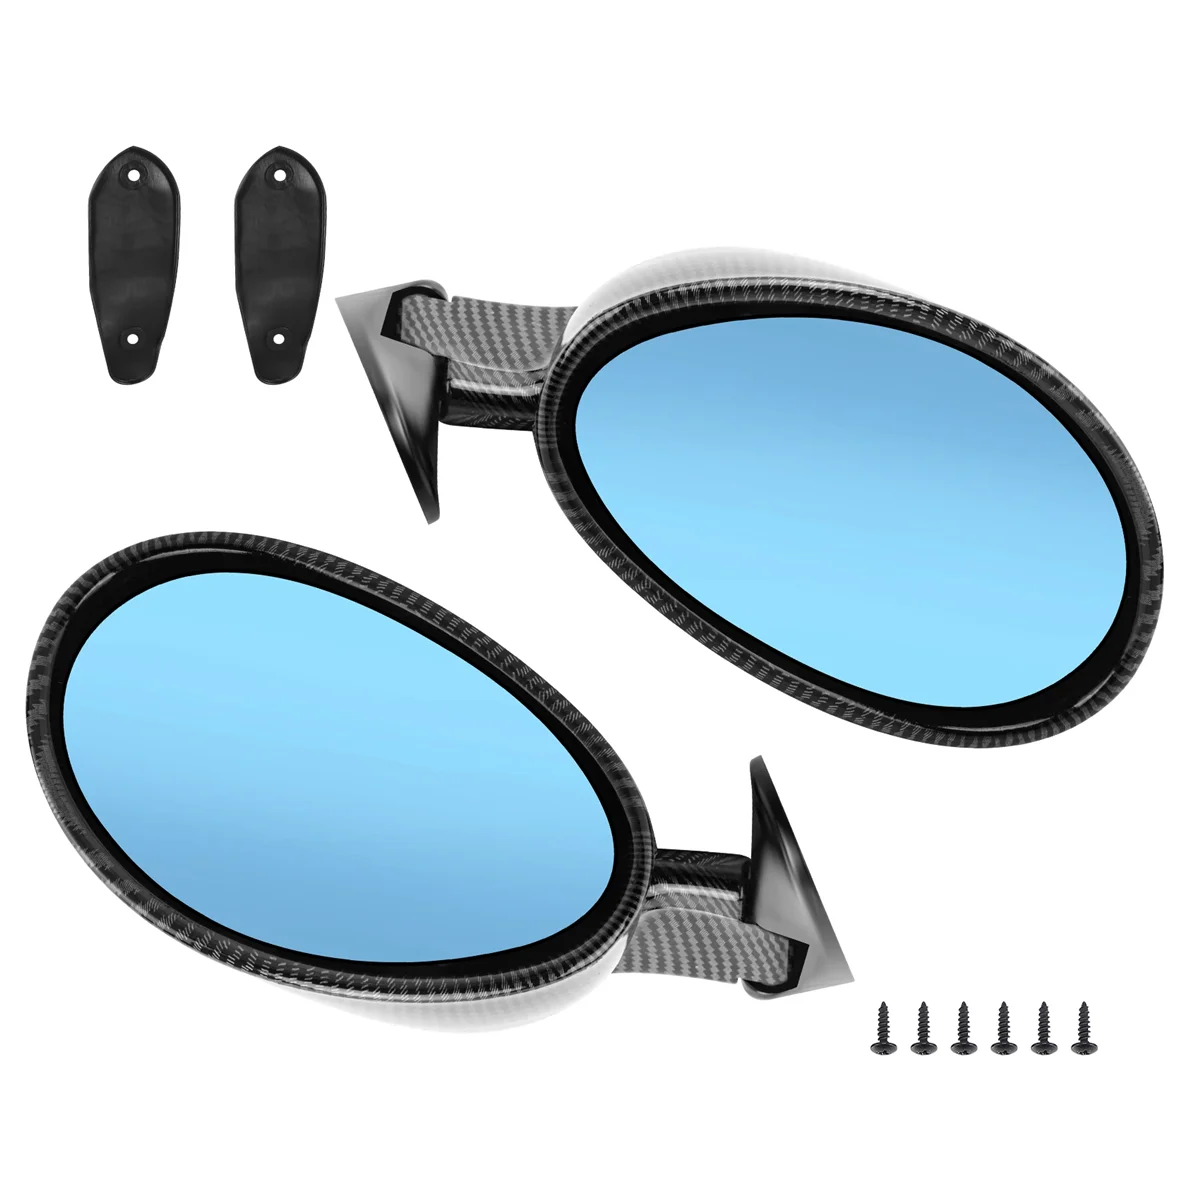 

California Style Left & Right Car Classic Retro Door Wing Side Mirror Rearview Vintage Matte Universal Carbon Fiber Look